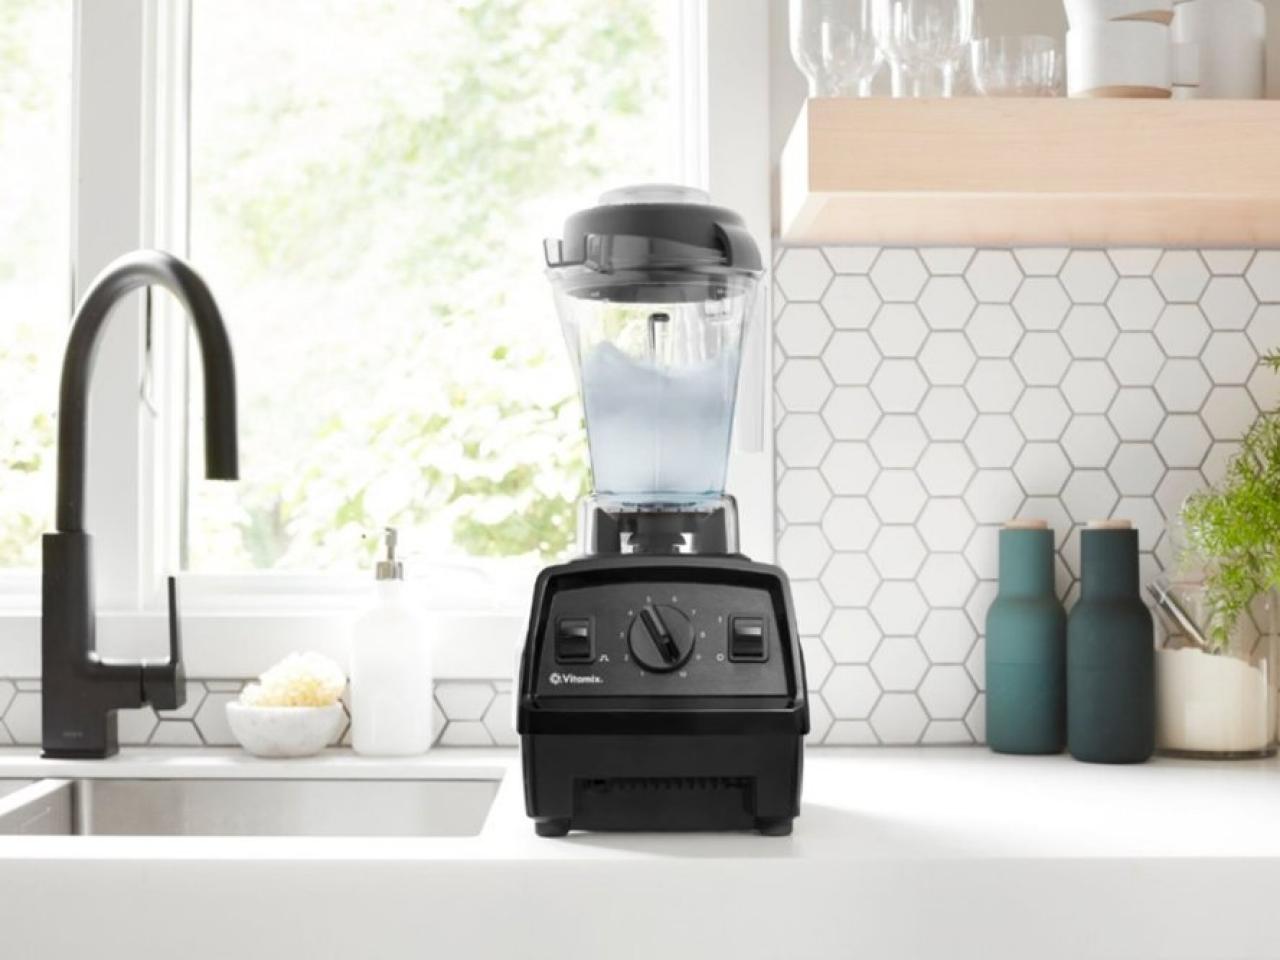 Vitamix blenders are on sale during  Early Prime Access